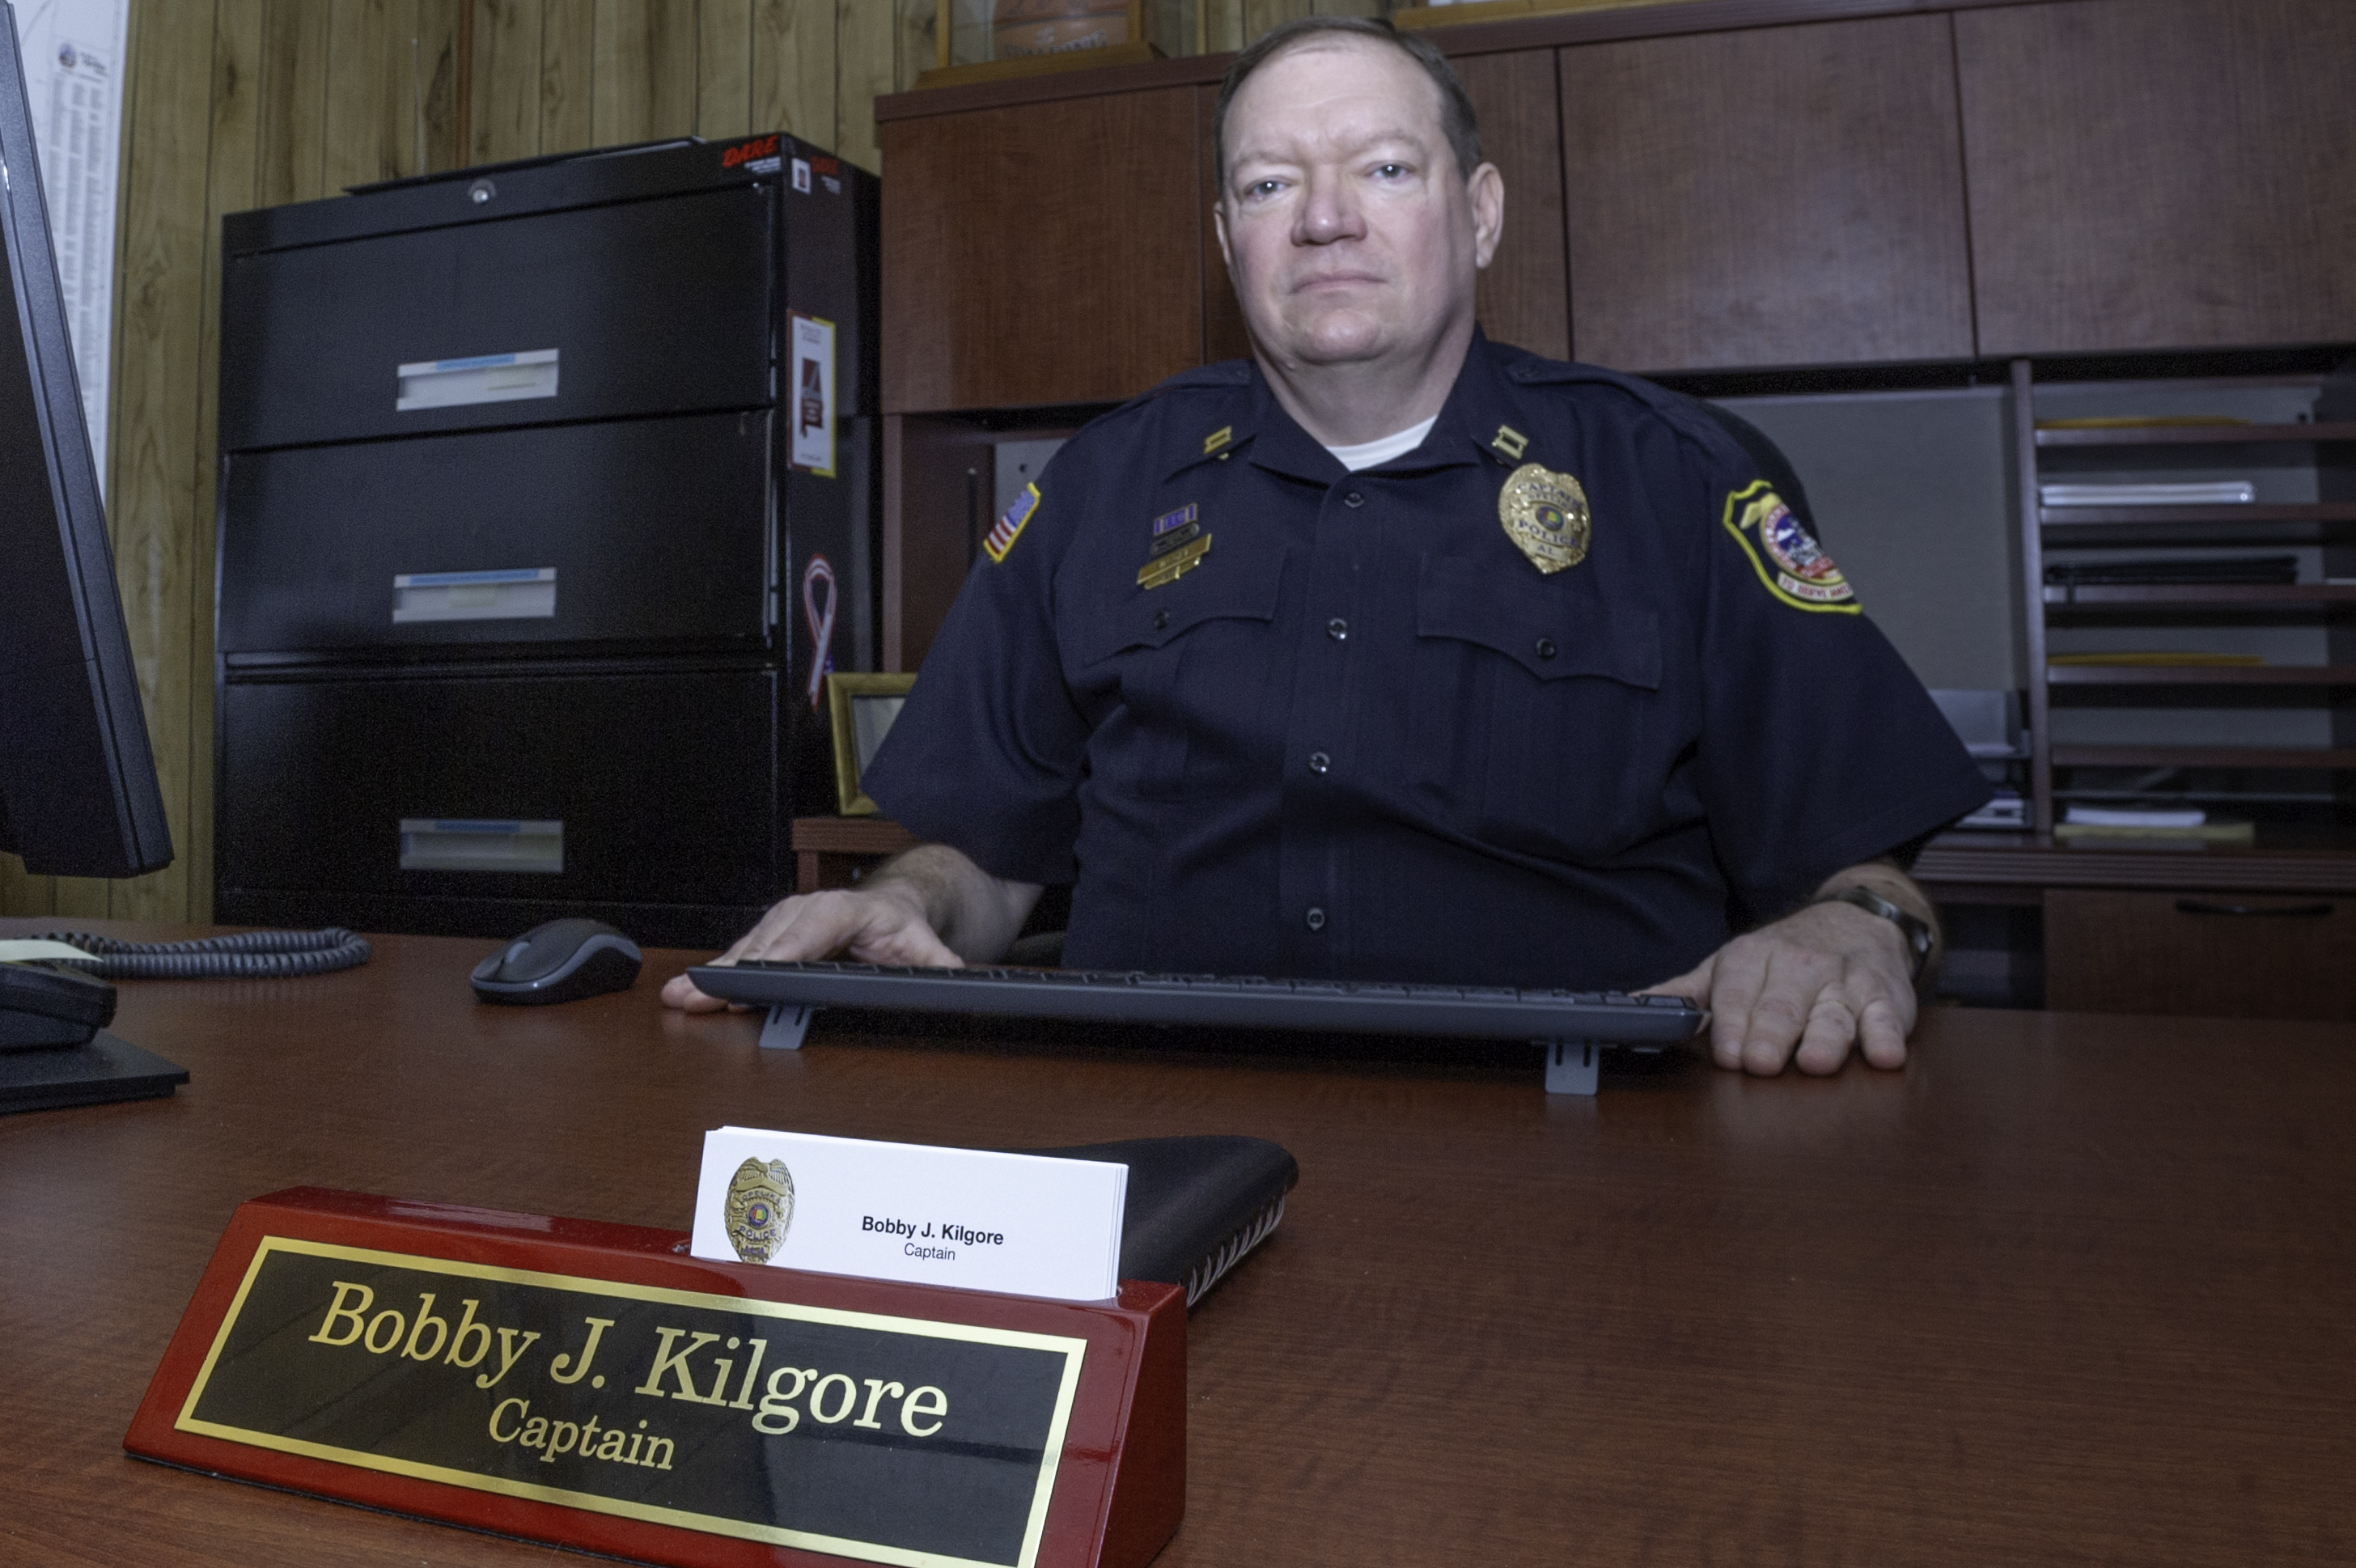 Capt. Bobby Kilgore to retire after 29 years with Opelika Police Department